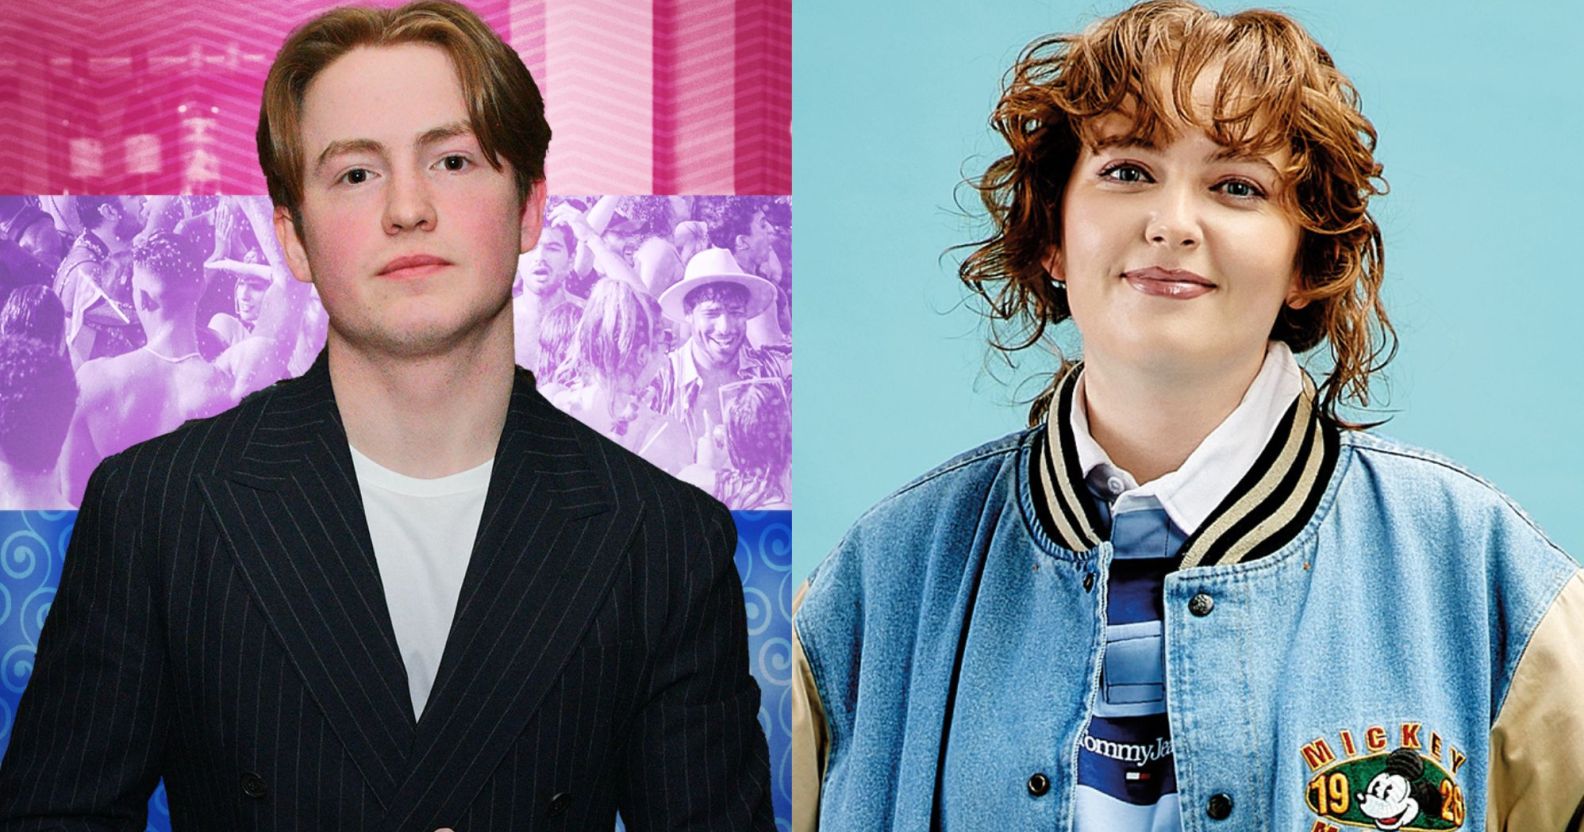 Two side by side images of Heartstopper actor Kit Connor in a black suit and white t-shirt standing against a bisexual flag background and author Alice Oseman wearing a blue jacket standing against a light blue background.